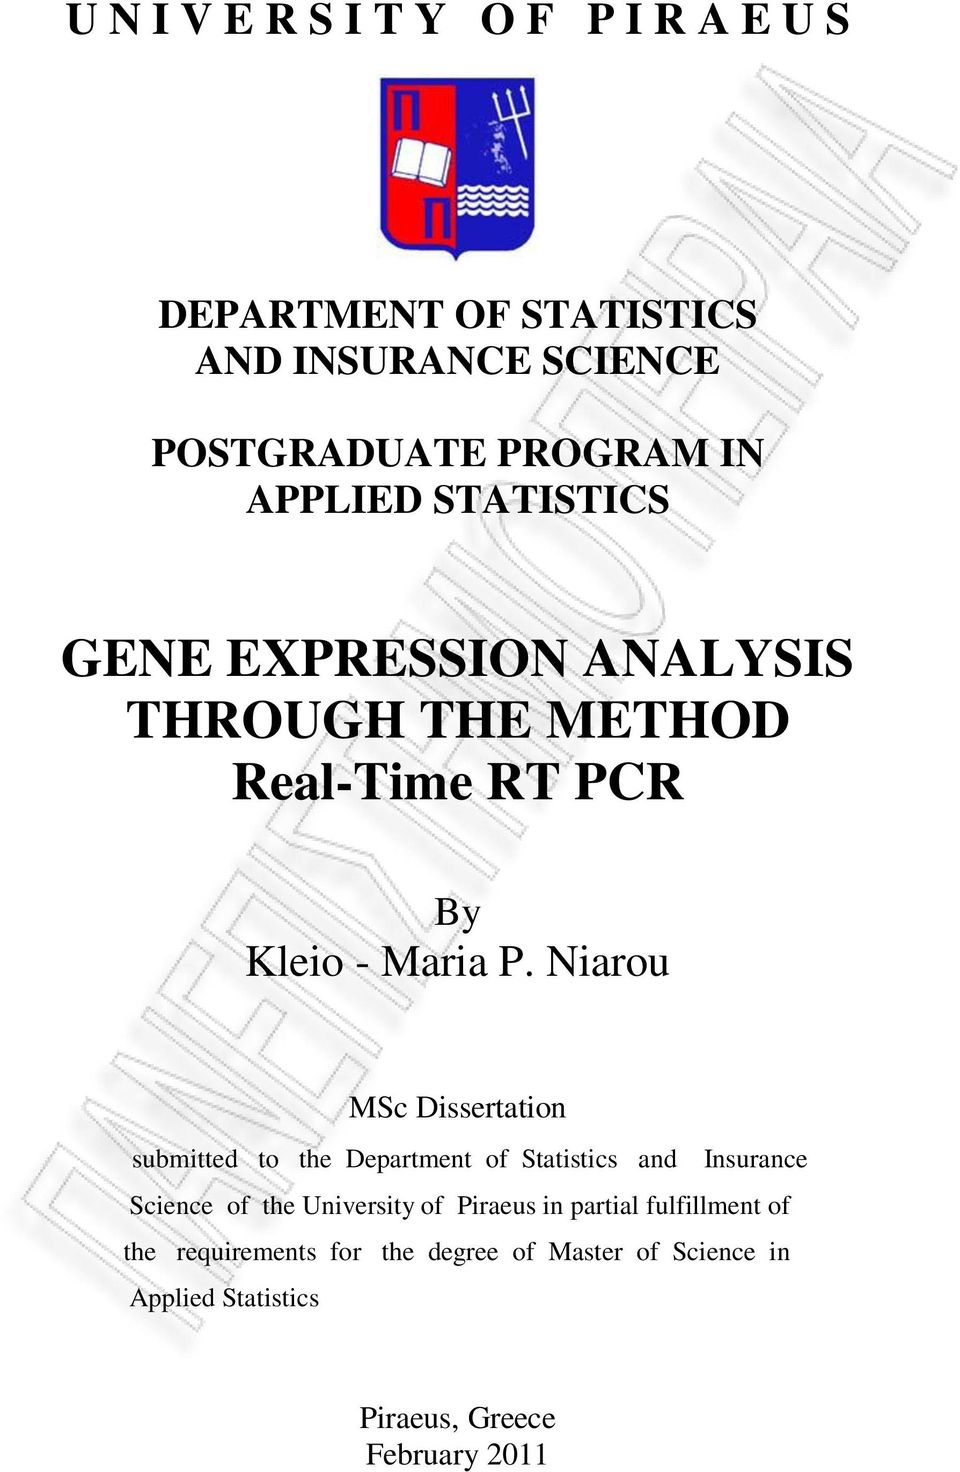 Niarou MSc Dissertation submitted to the Department of Statistics and Insurance Science of the University of